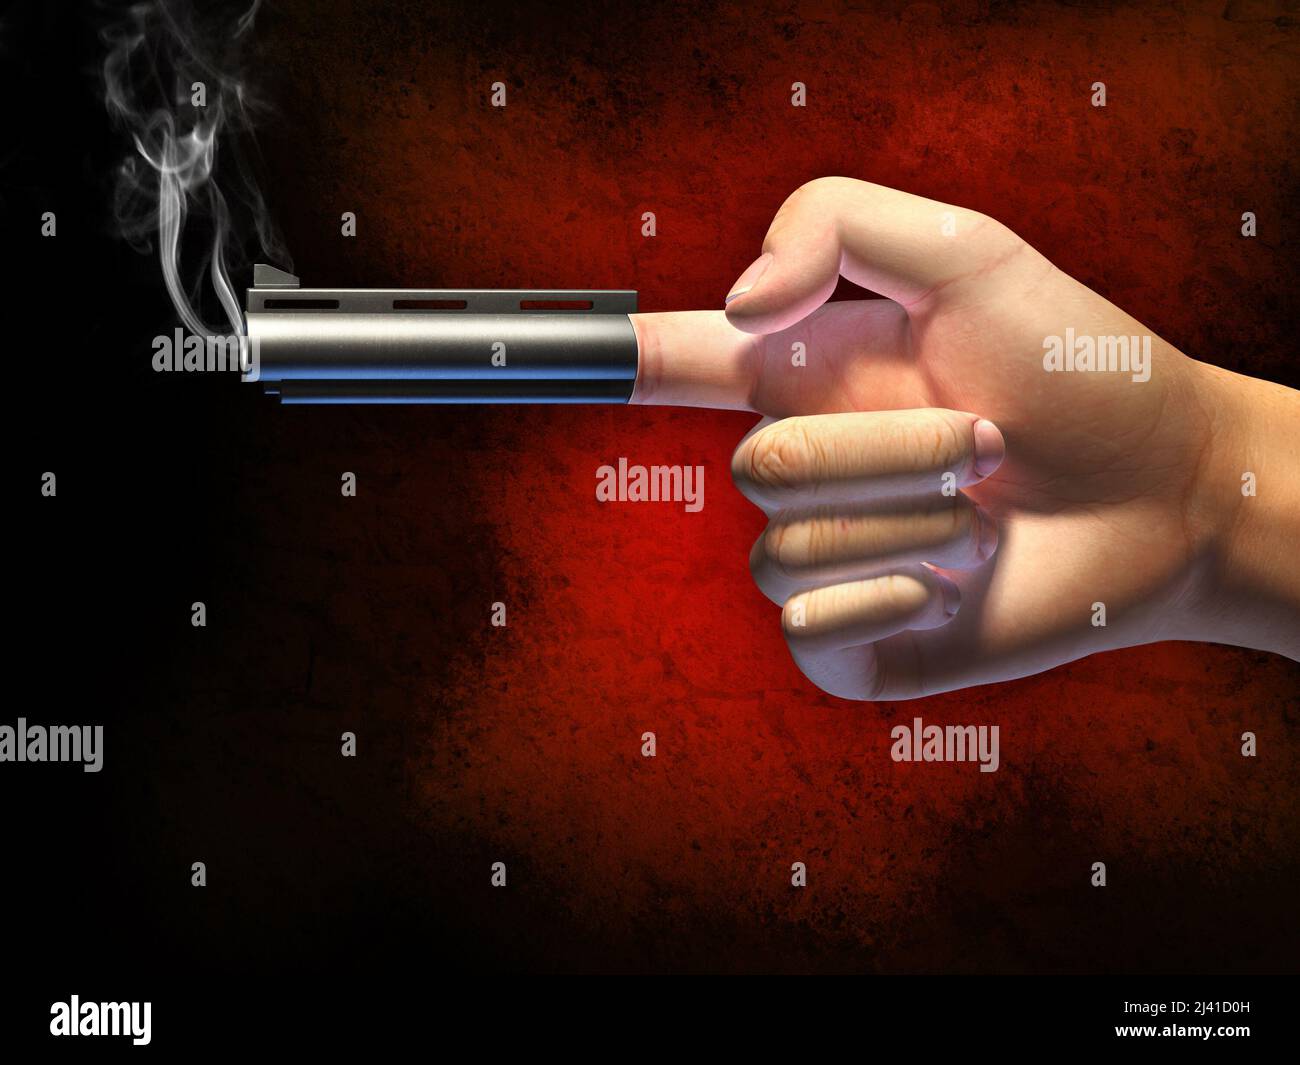 Hand in a typical gun gesture, shooting from its index finger. Digital illustration, clipping path allows to separate hand from background. Stock Photo